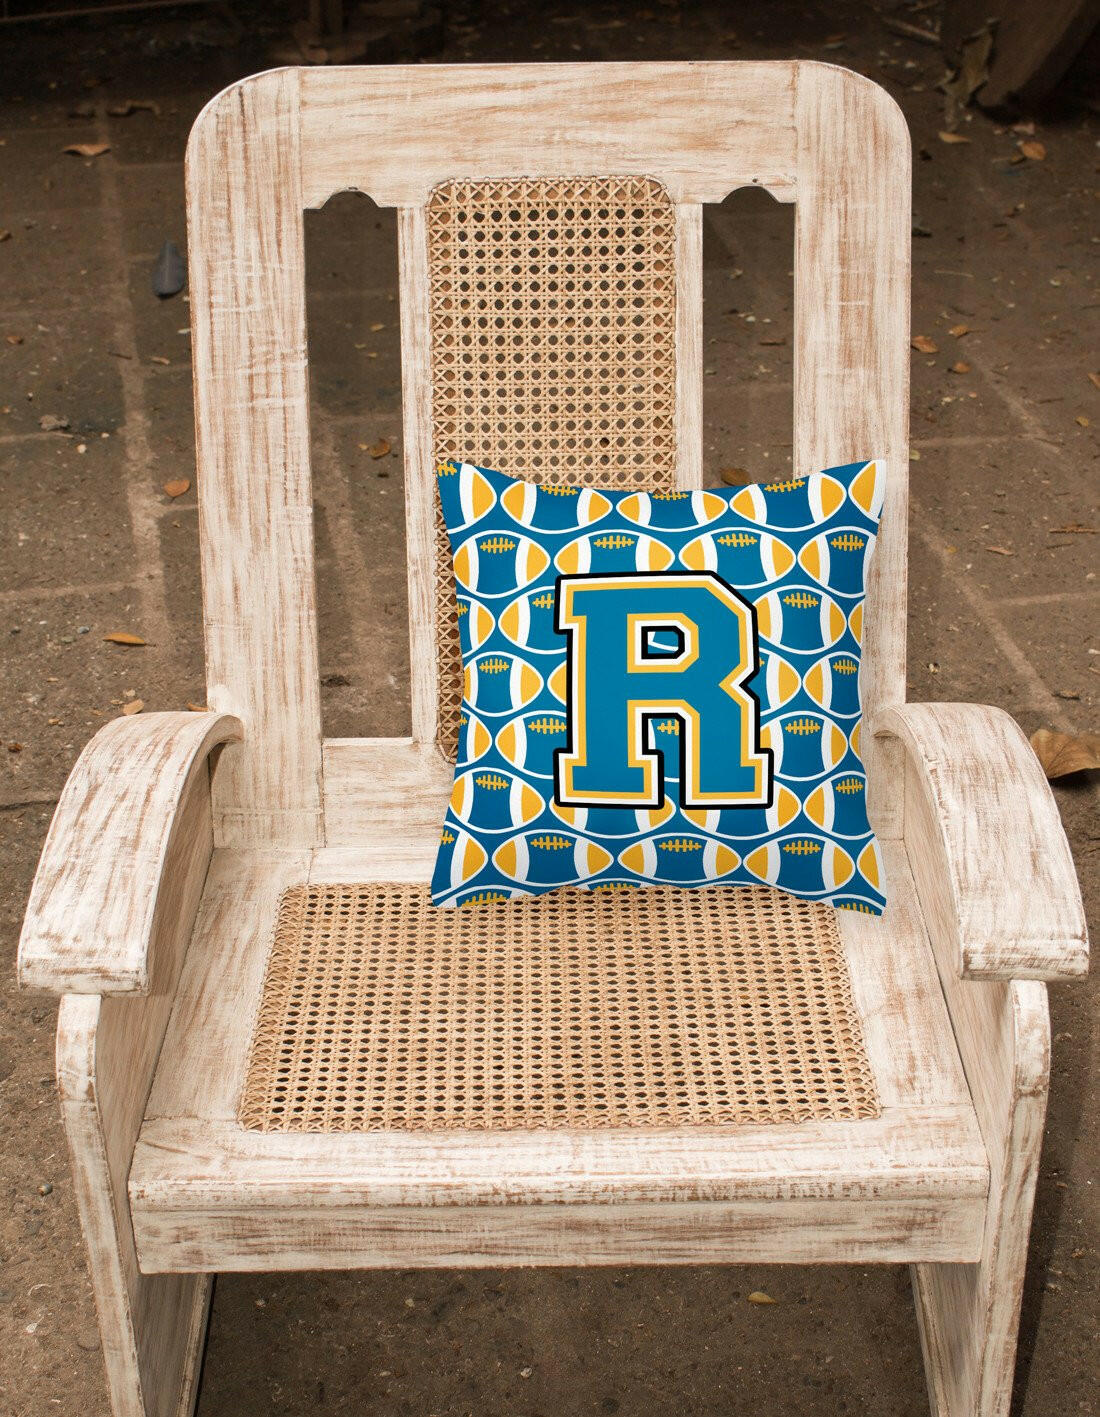 Letter R Football Blue and Gold Fabric Decorative Pillow CJ1077-RPW1414 by Caroline's Treasures